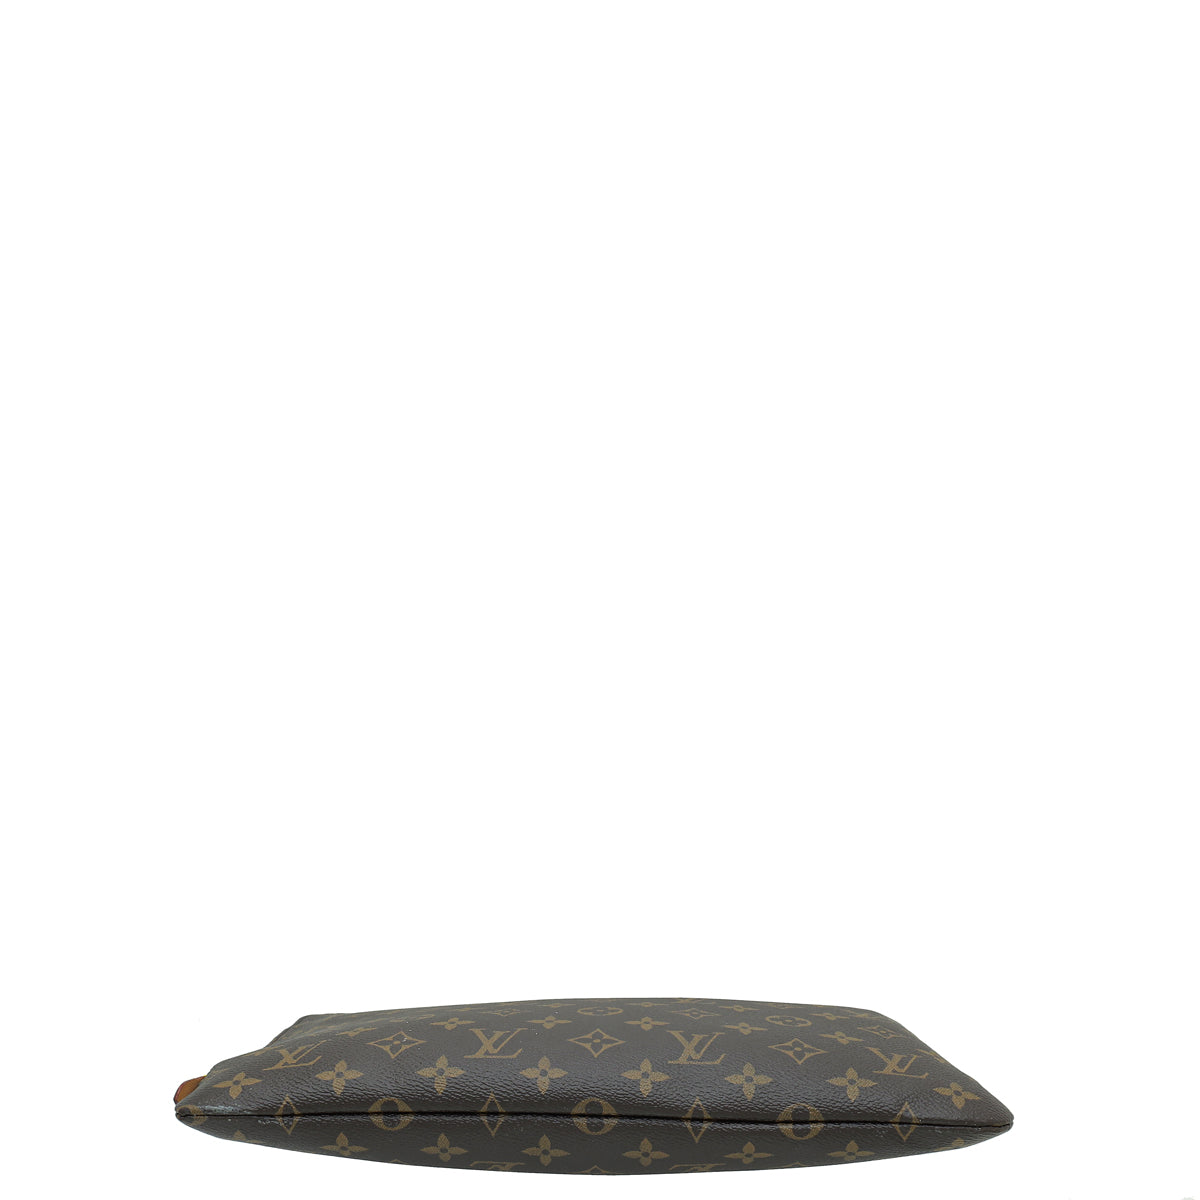 Louis Vuitton Etui Voyage Monogram GM Brown in Coated Canvas with